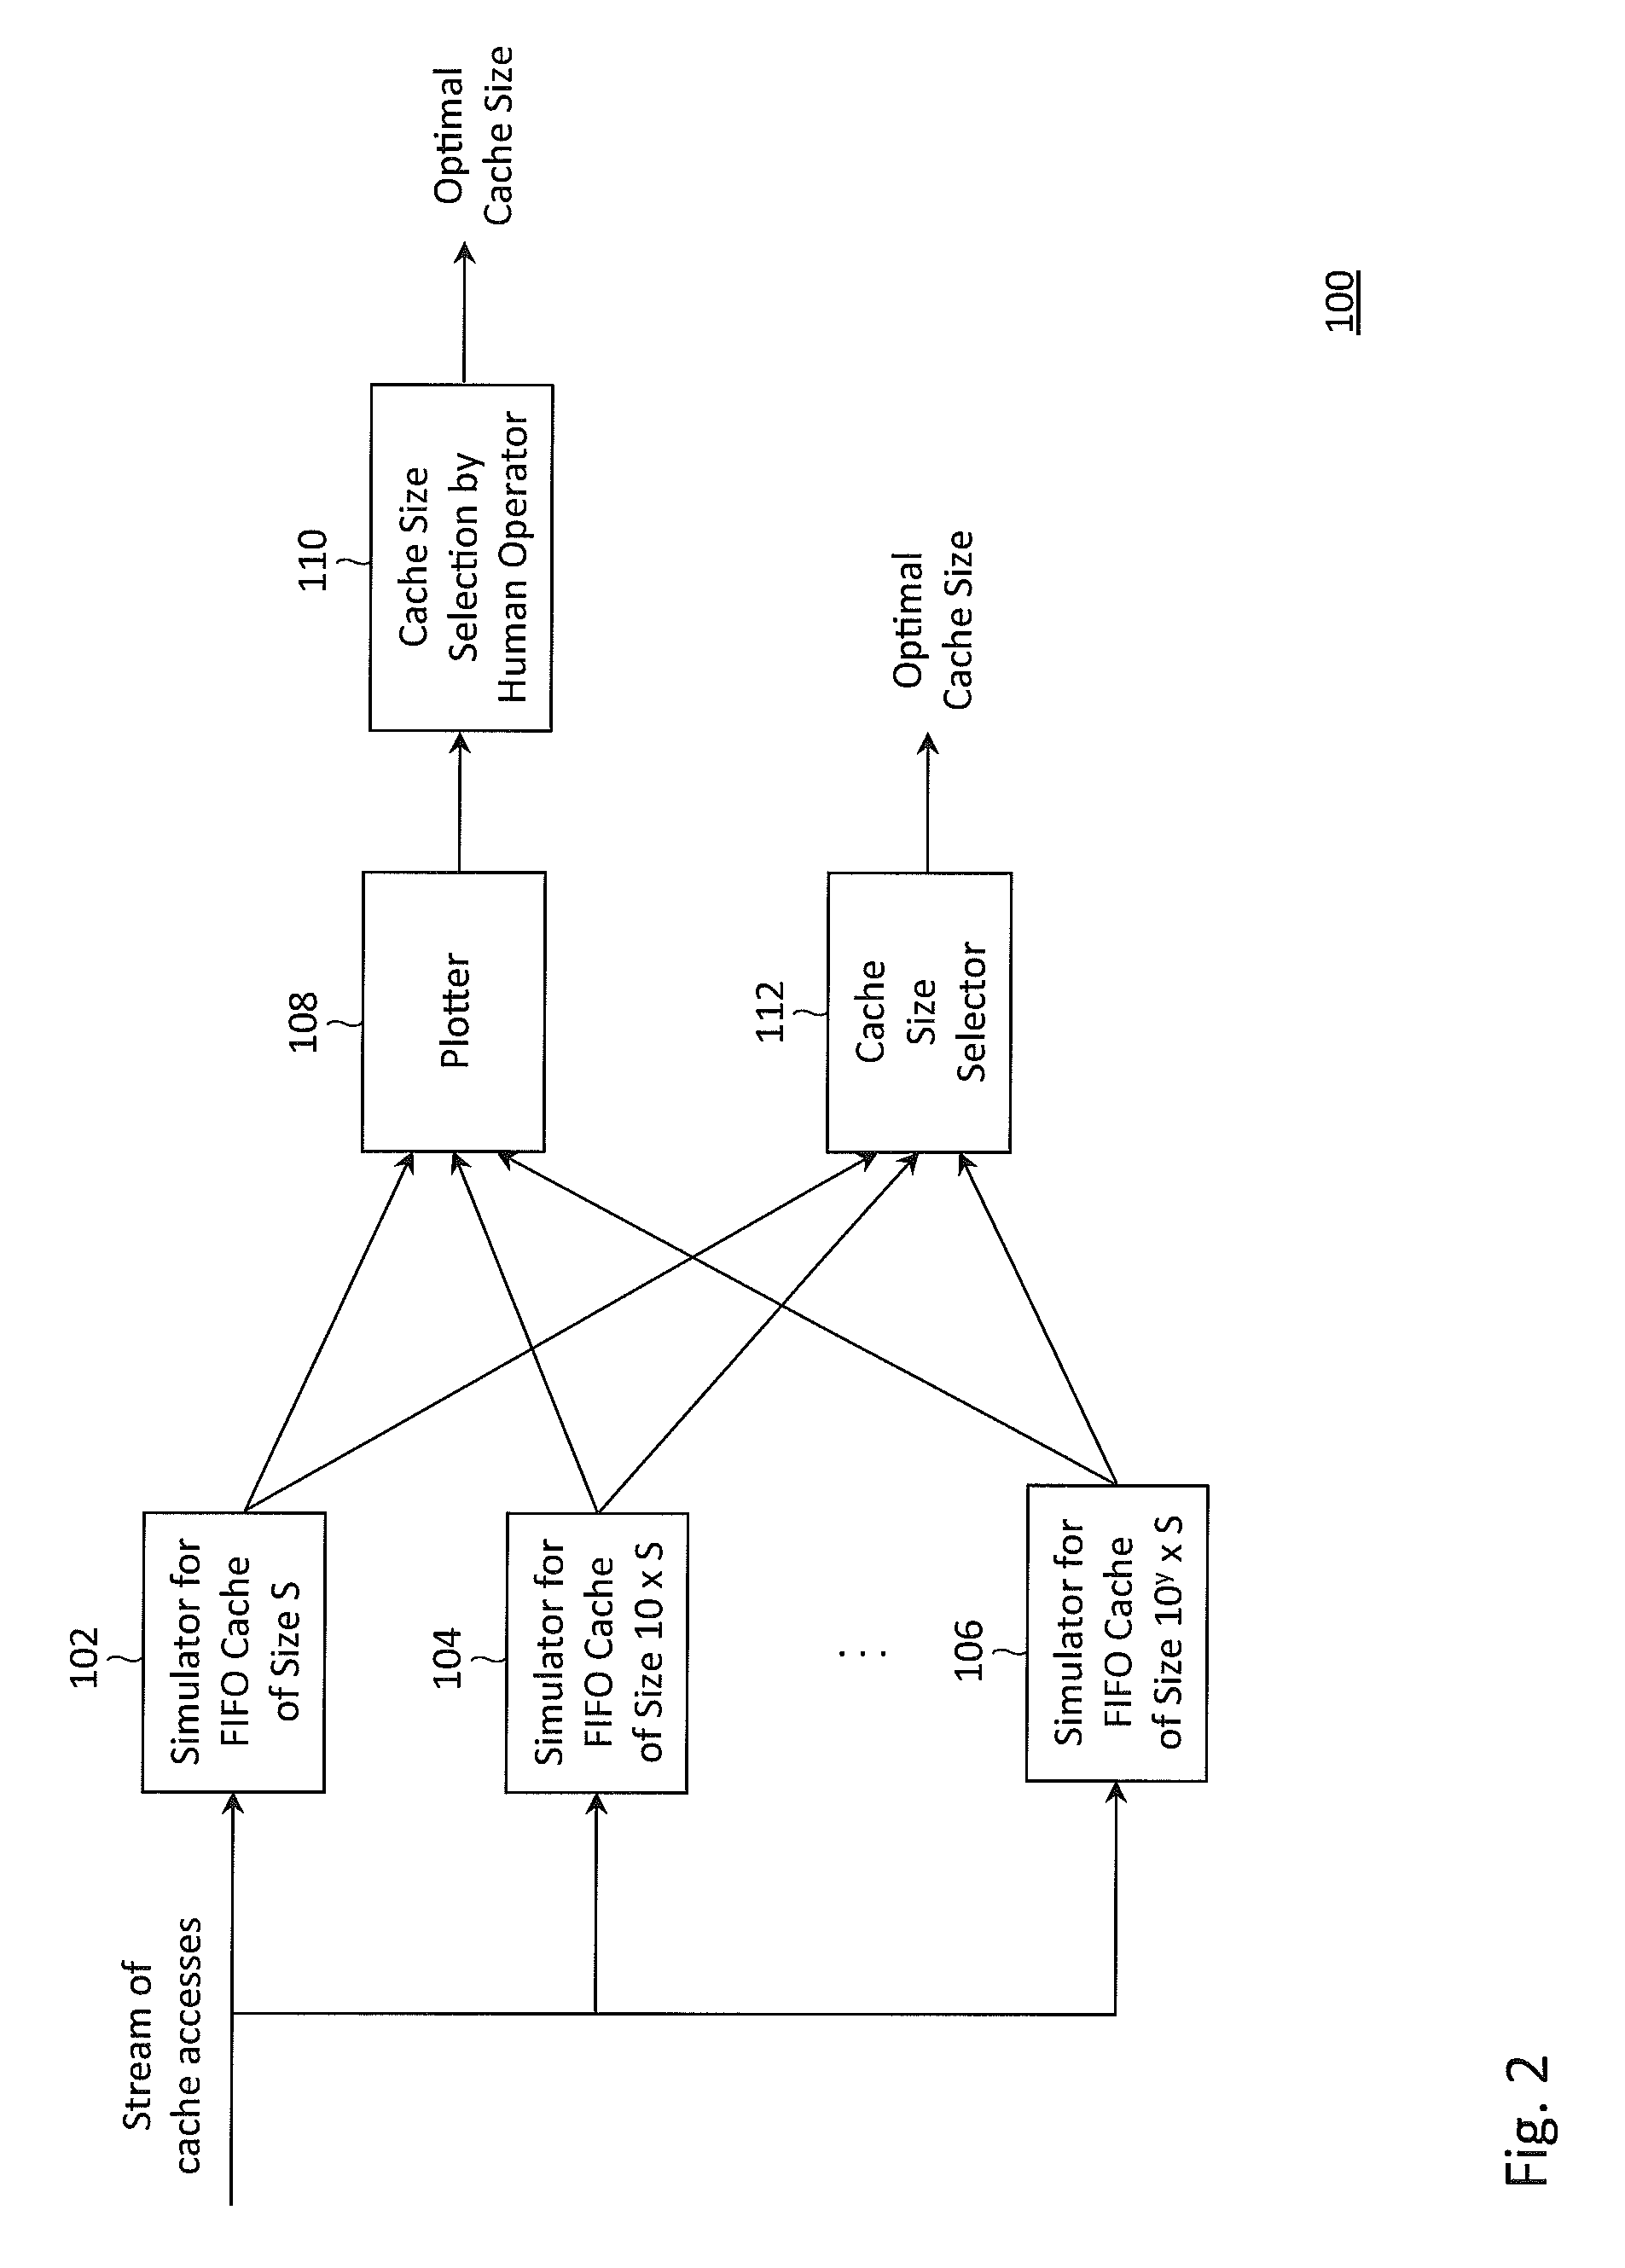 FIFO cache simulation using a bloom filter ring